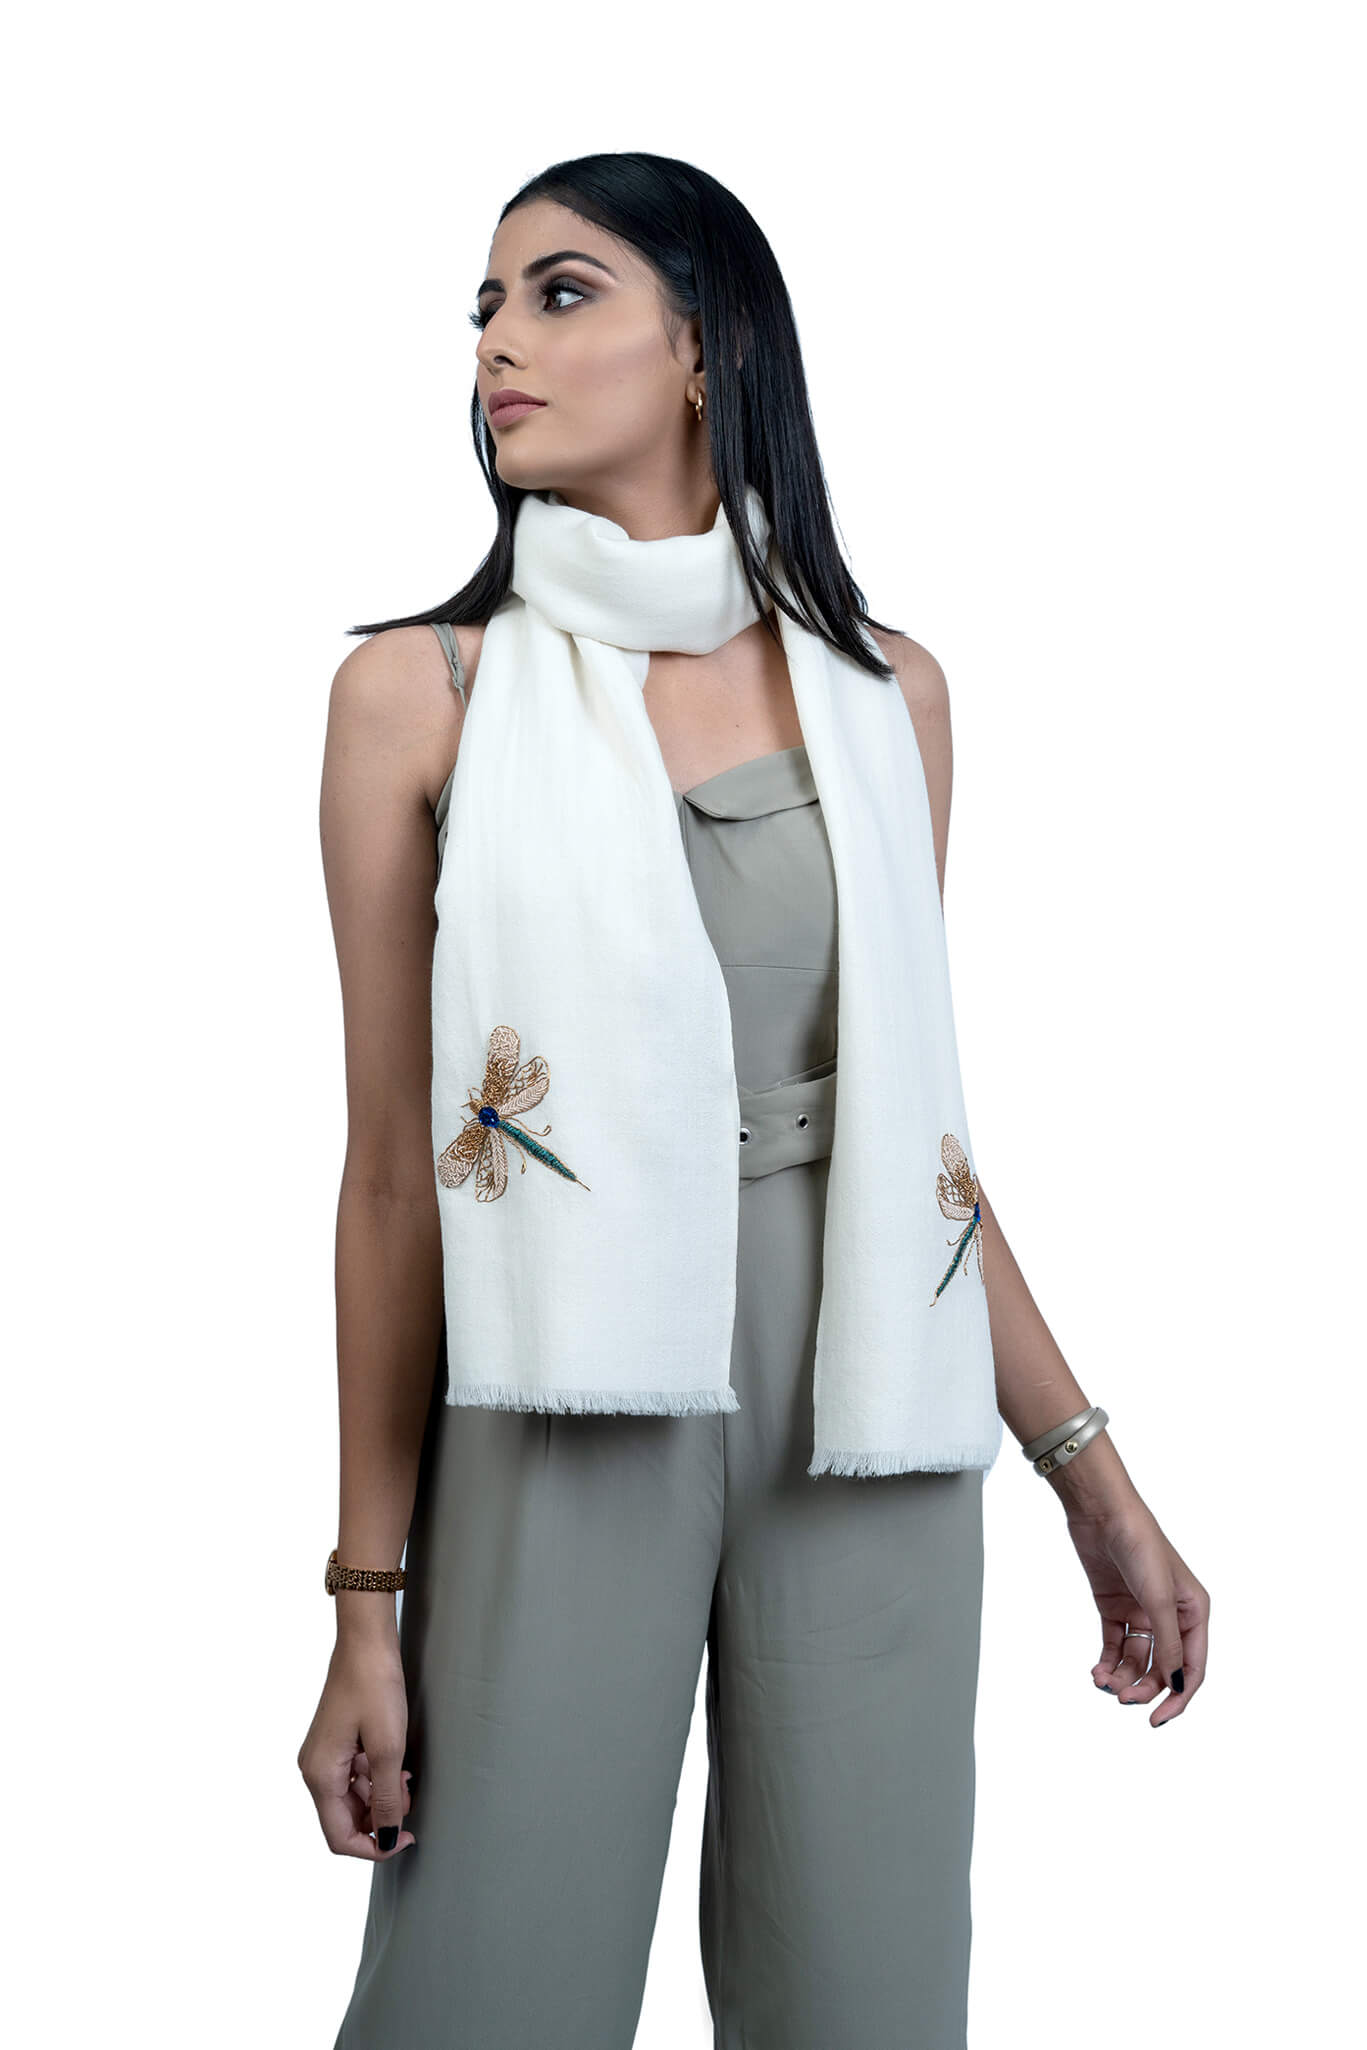 Dragonfly Cashmere Scarf